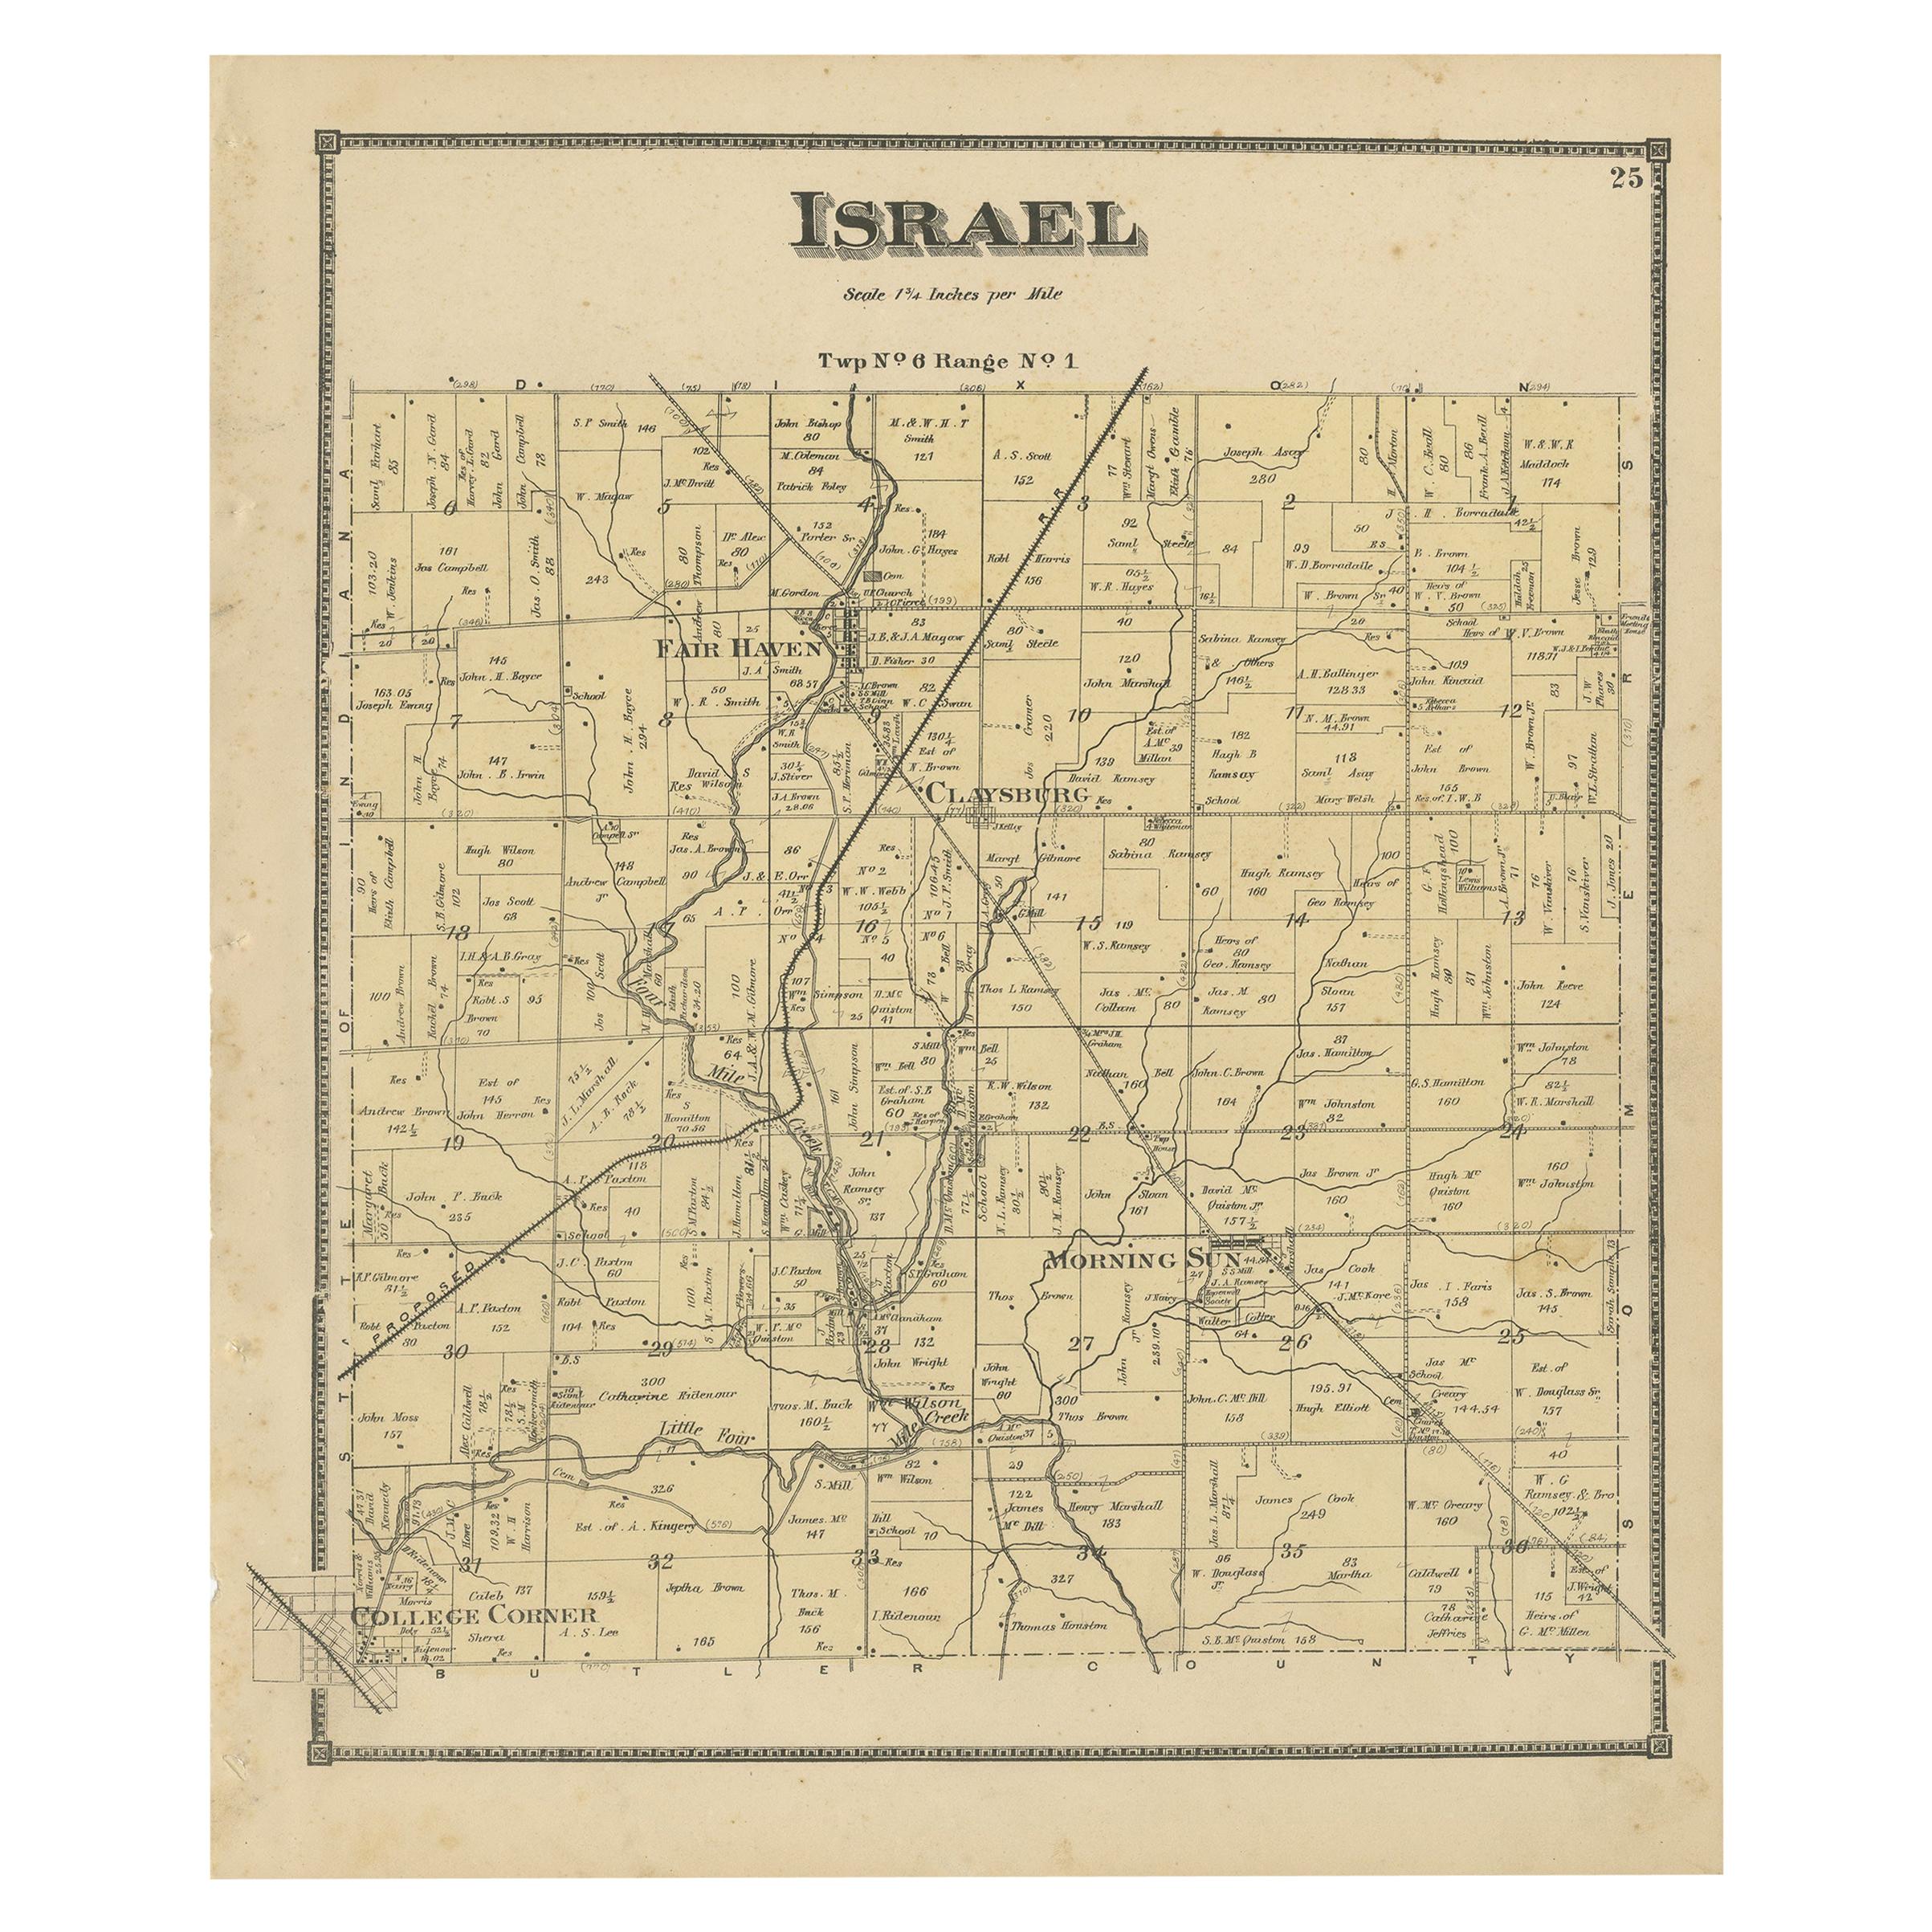 Antique Map of the Israel Township of Ohio by Titus '1871'